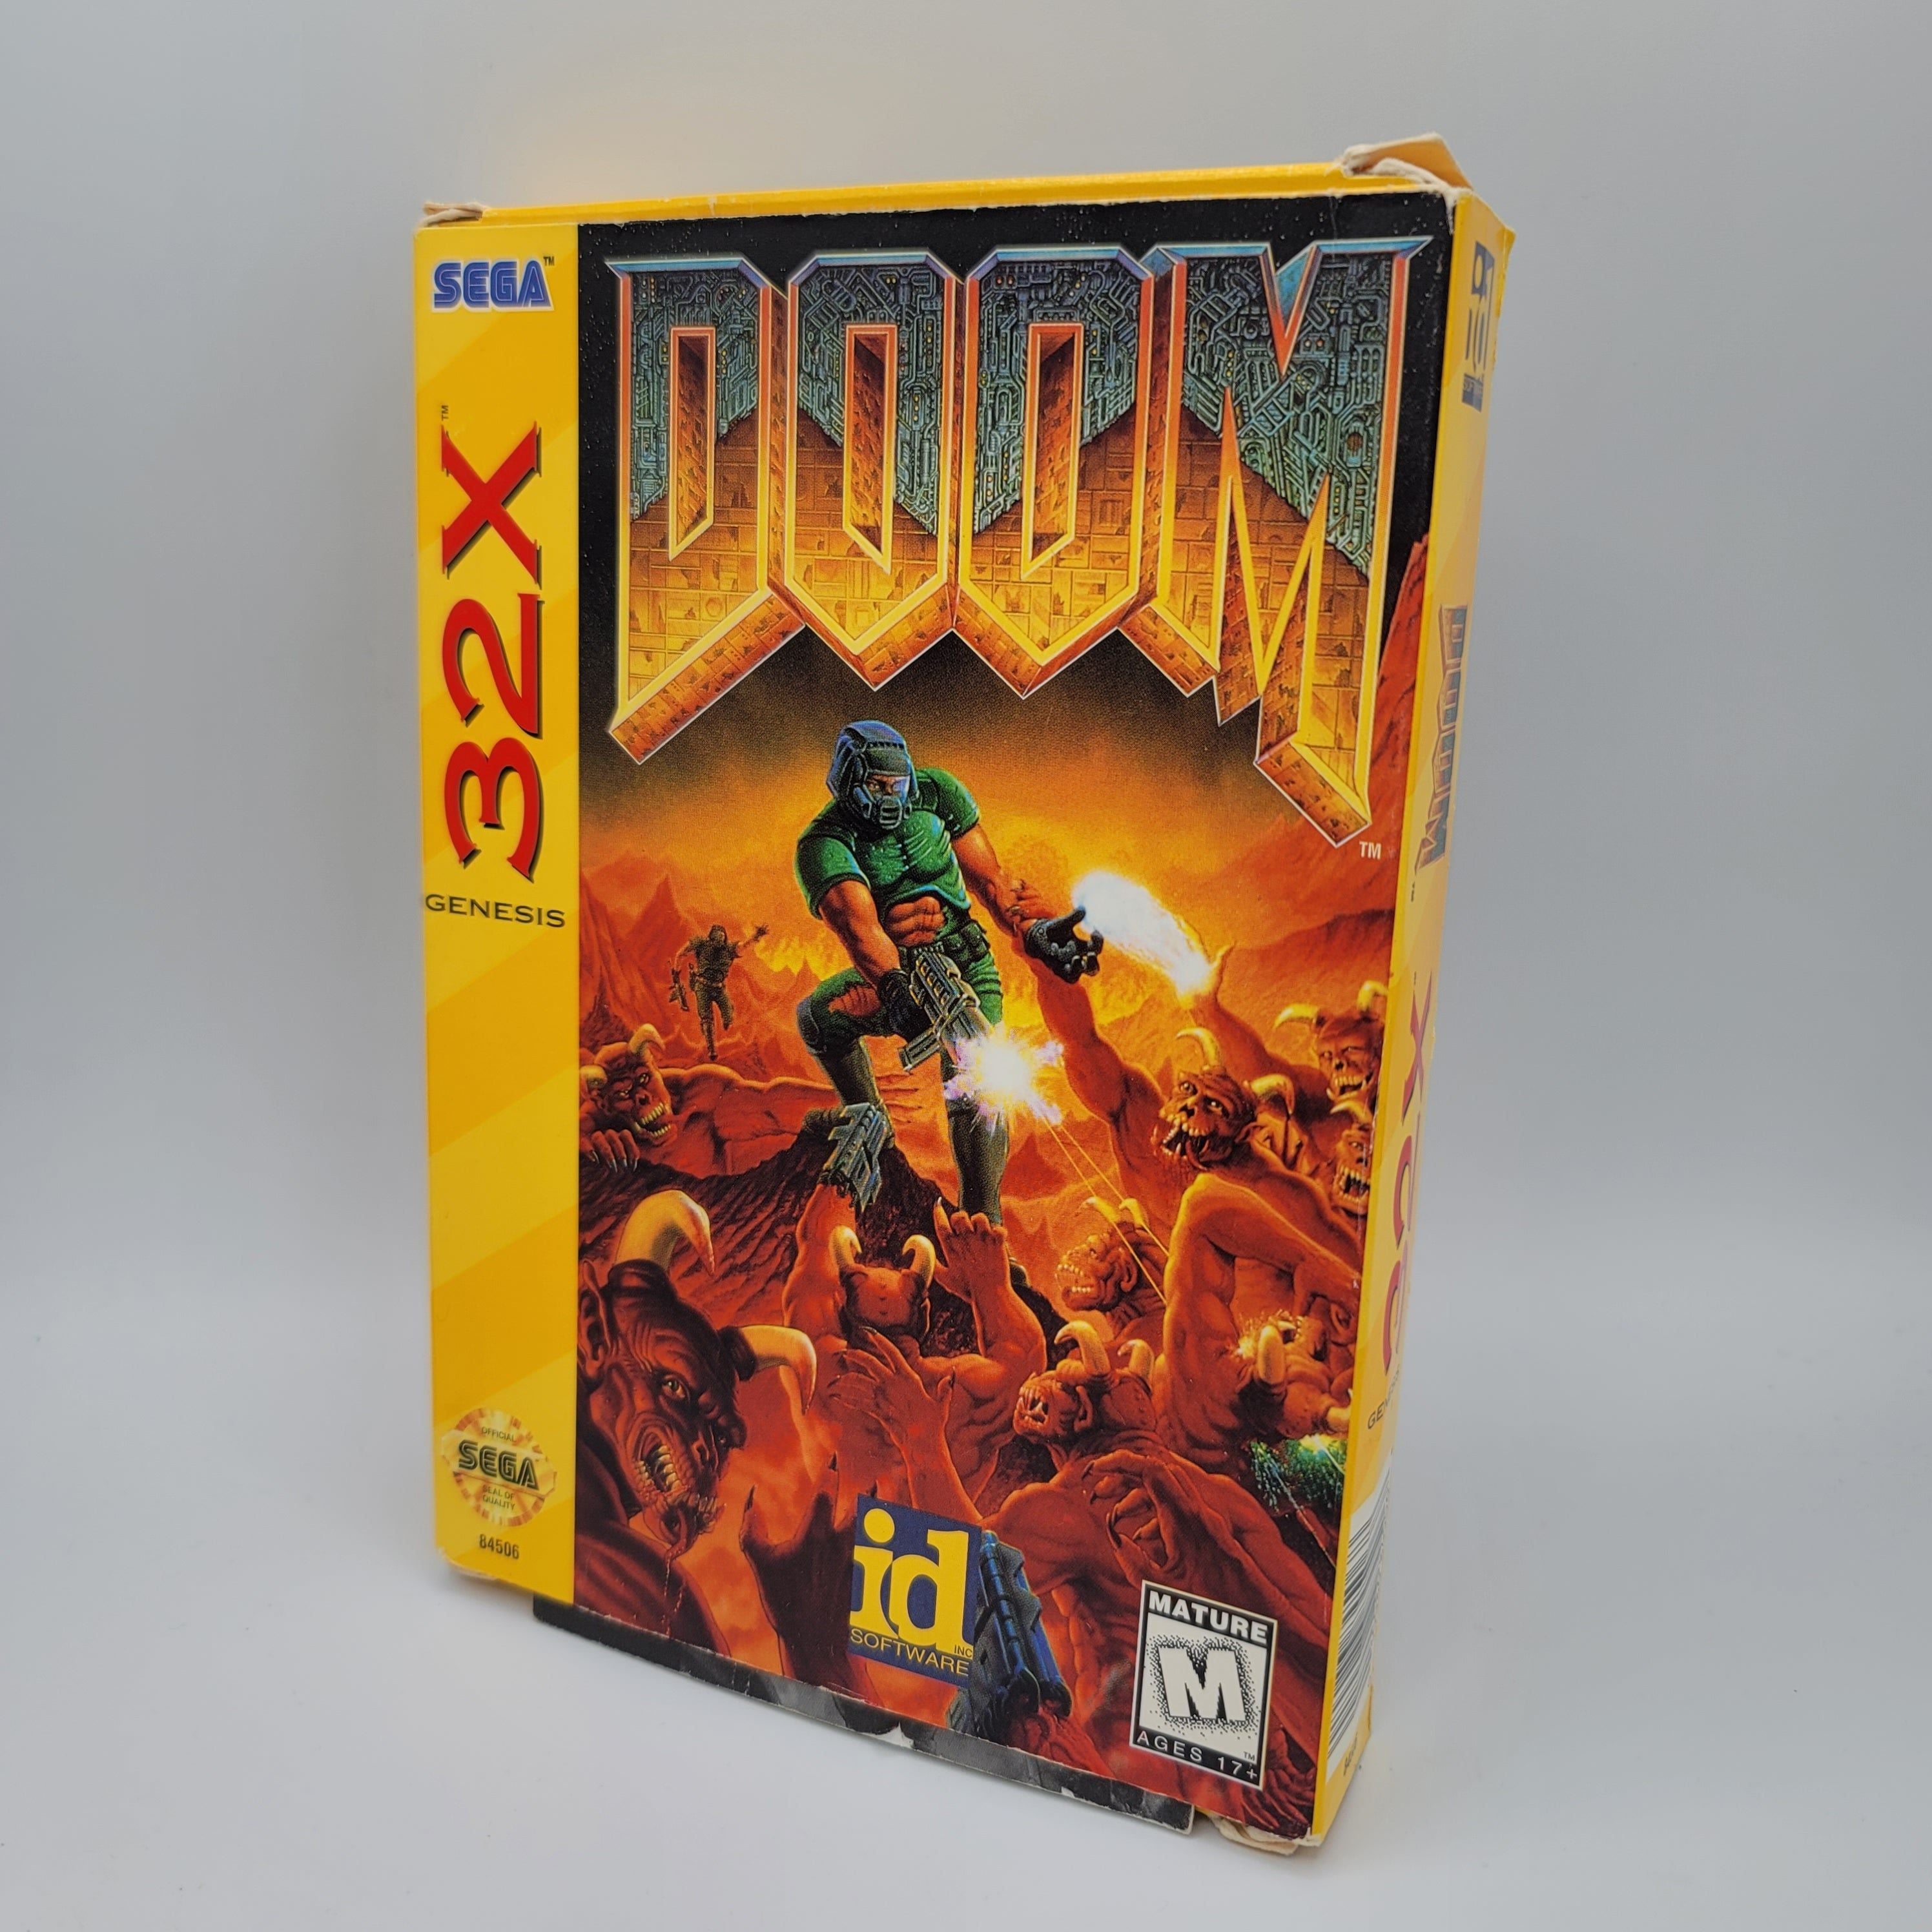 32X - Doom (Complete in Box / With Manual)